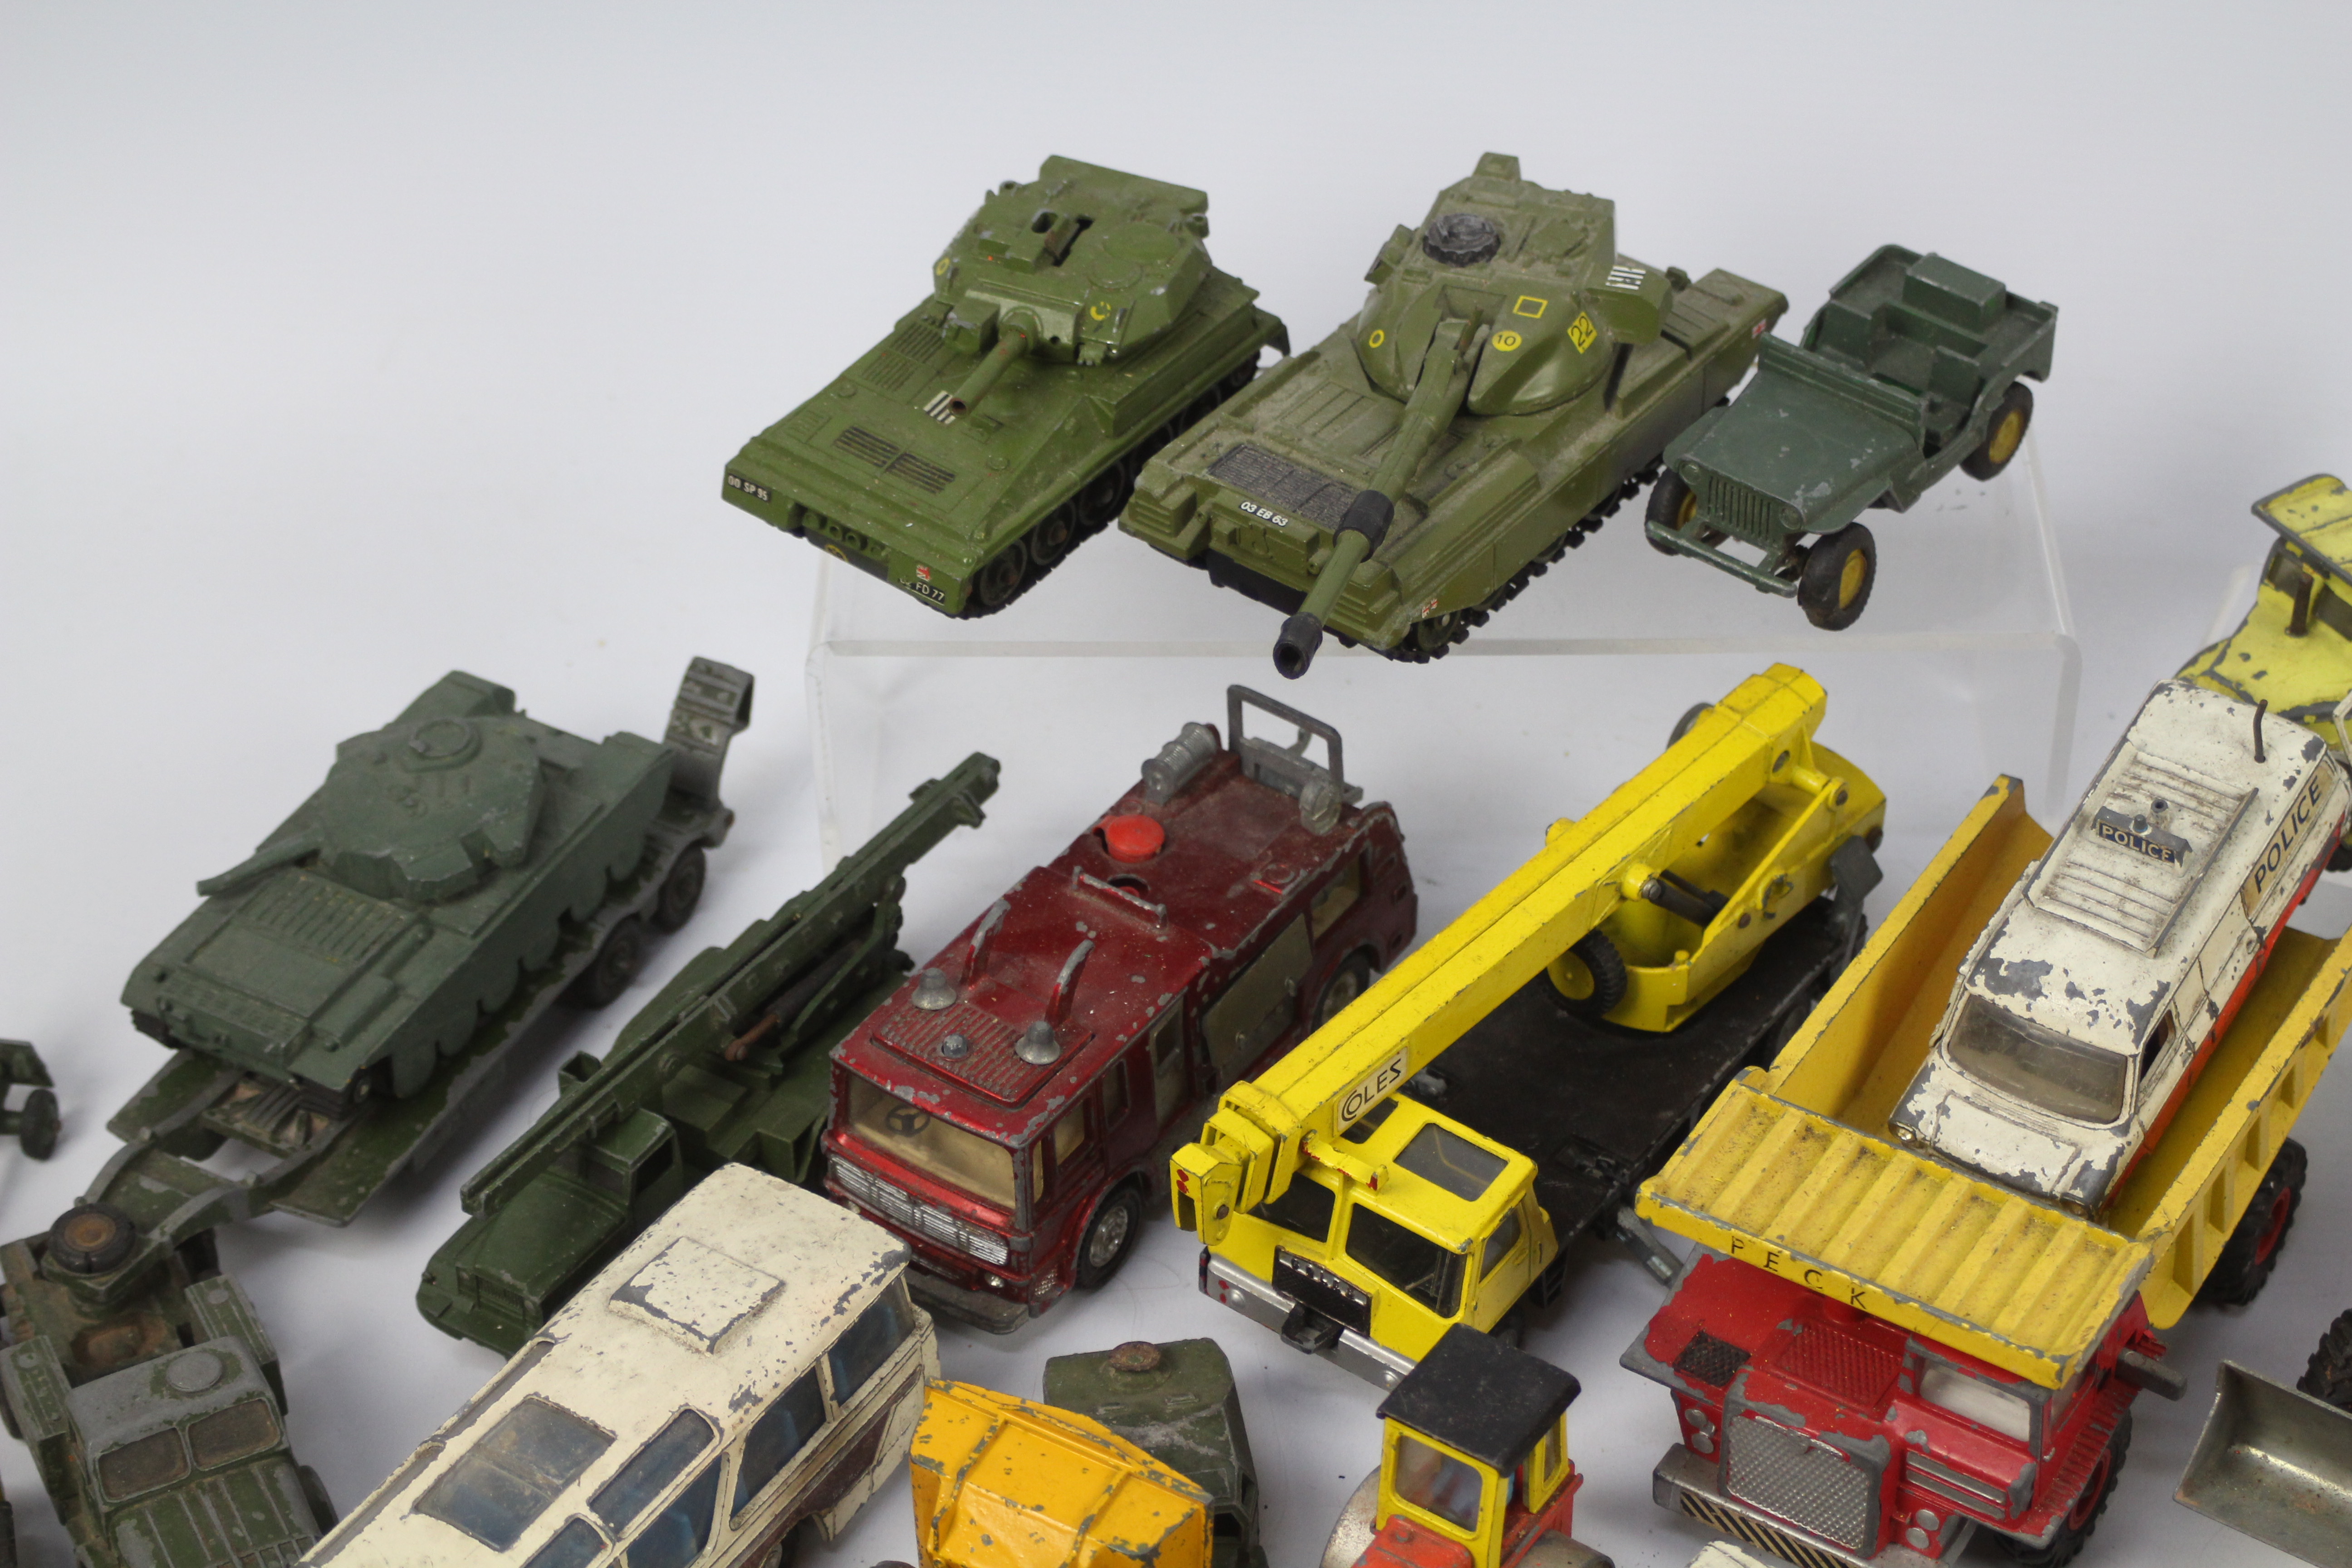 Dinky Toys - In excess of 20 loose Dinky Toys in playworn condition to include: DUKW Amphibian, - Image 4 of 4